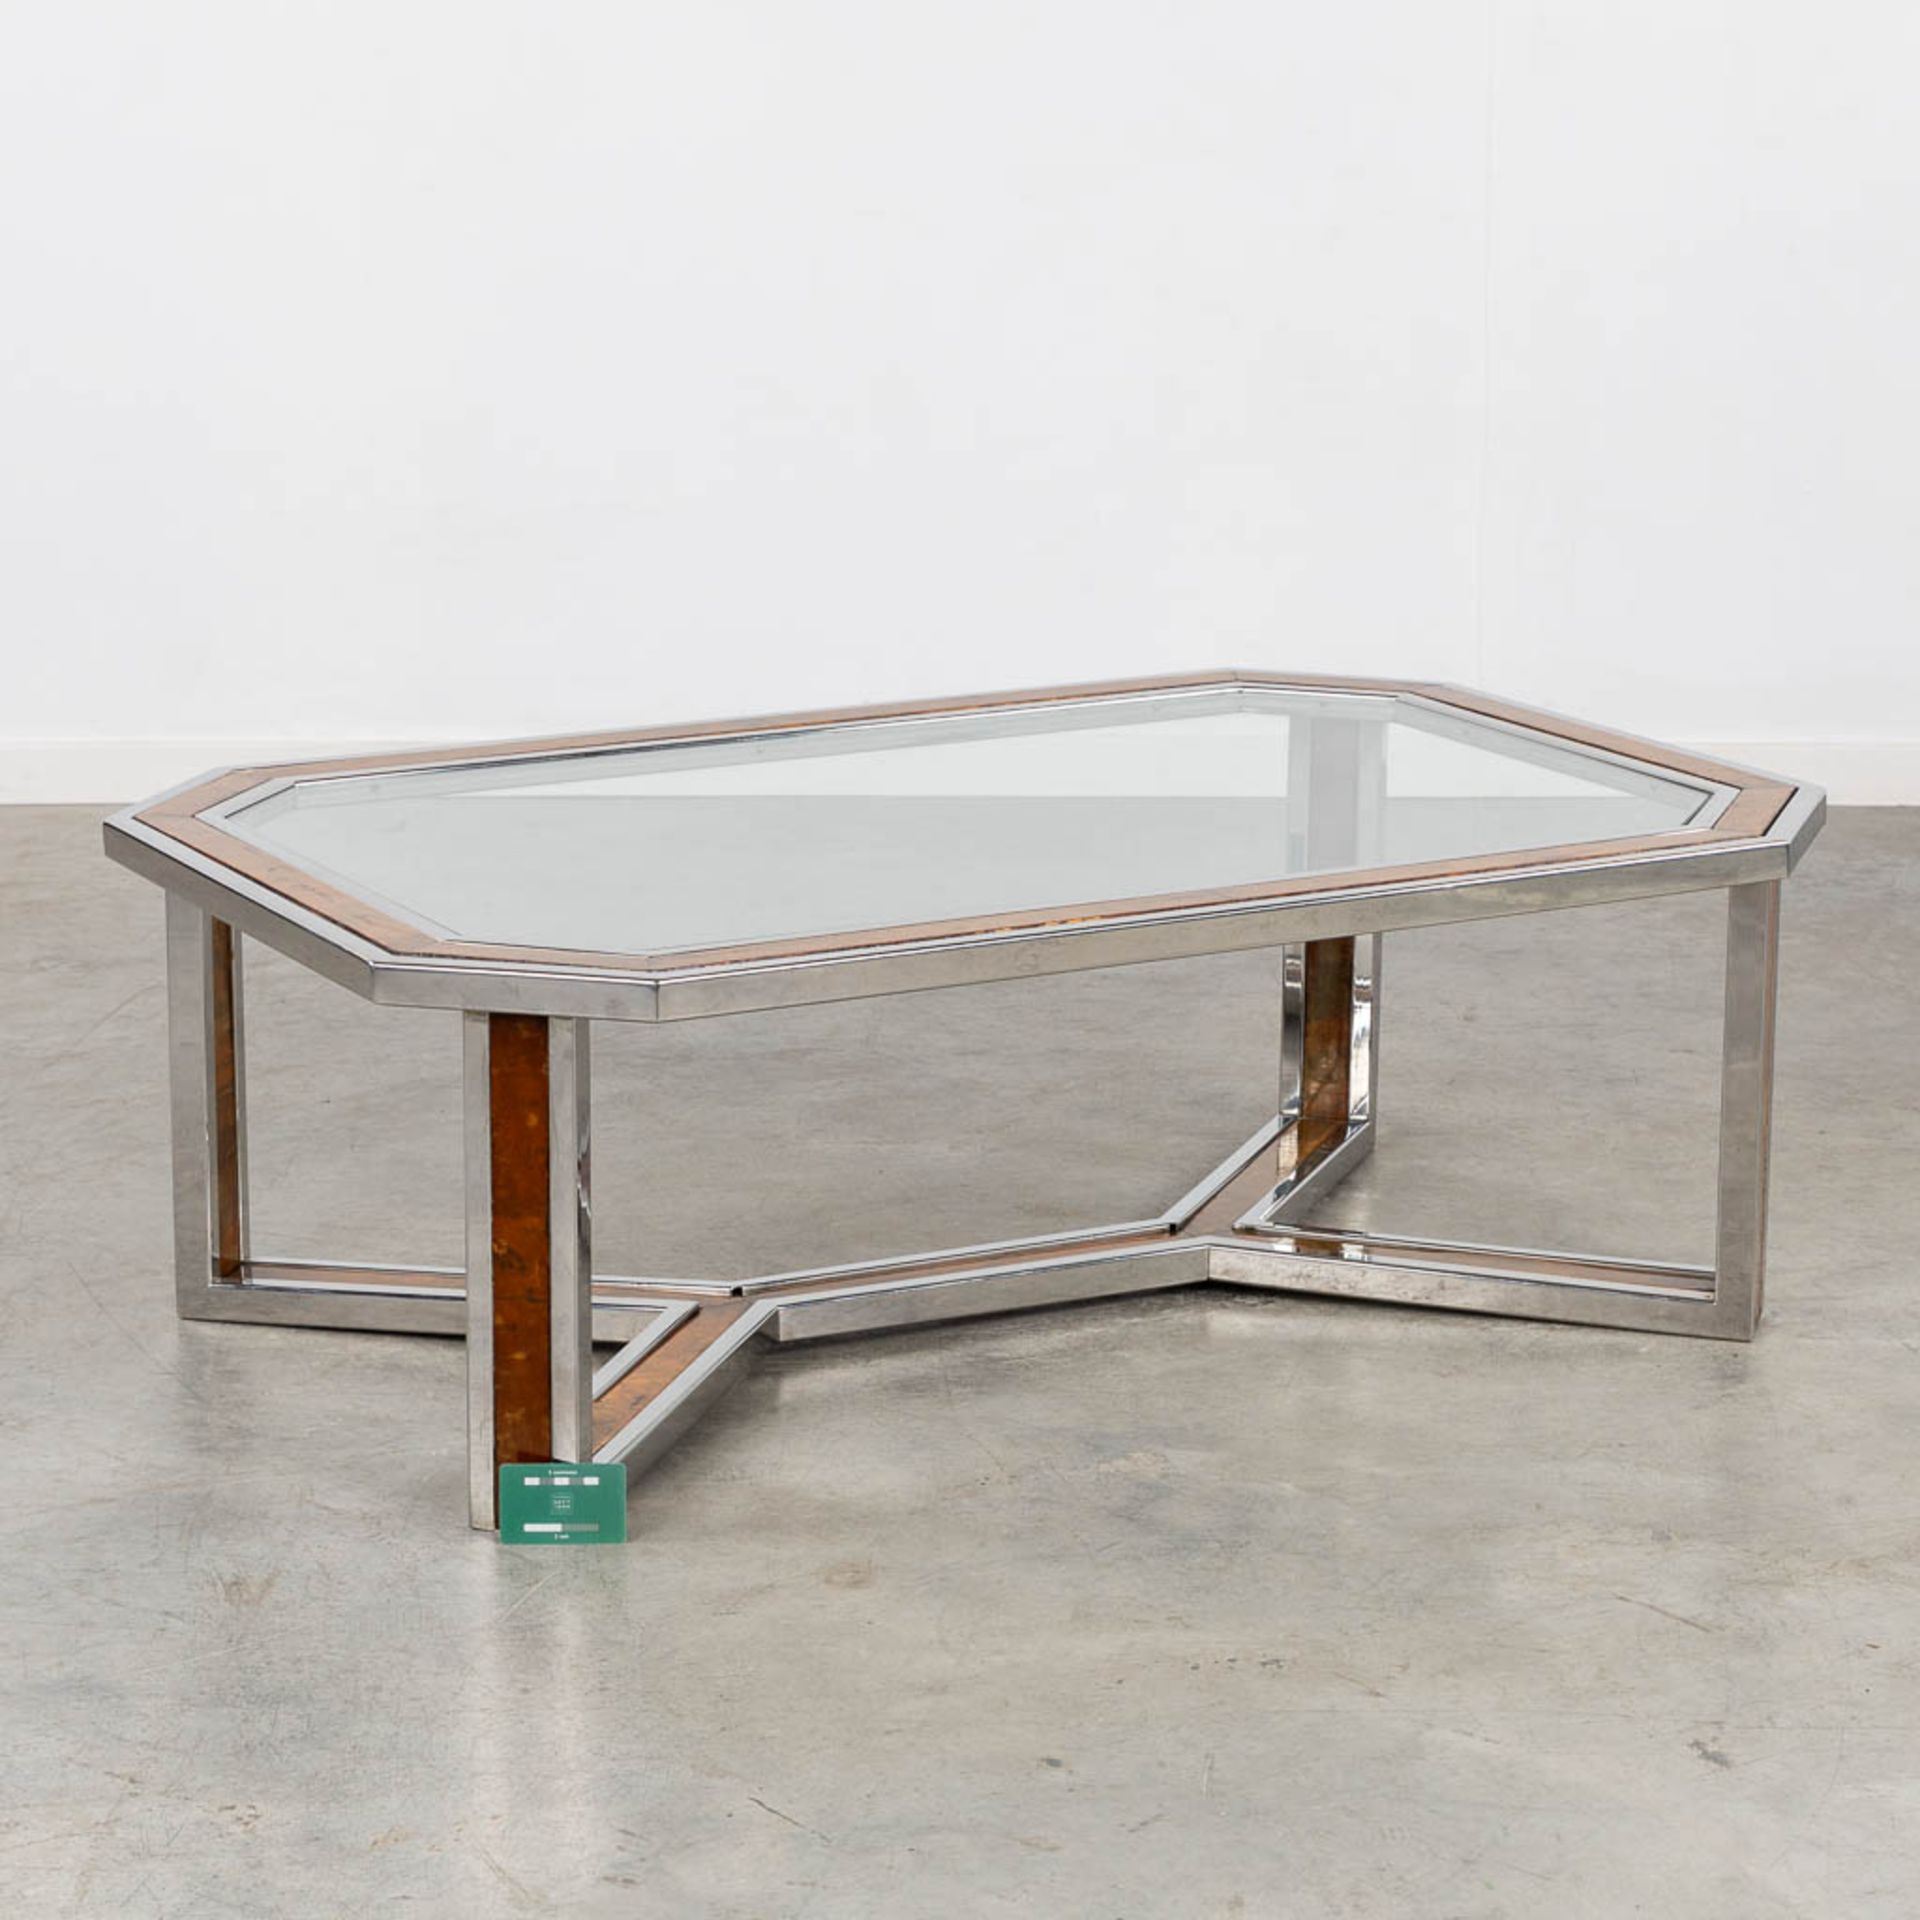 A coffee table, chrome with a faux wood inlay and a glass top. (L:80 x W:120 x H:40 cm) - Image 2 of 10